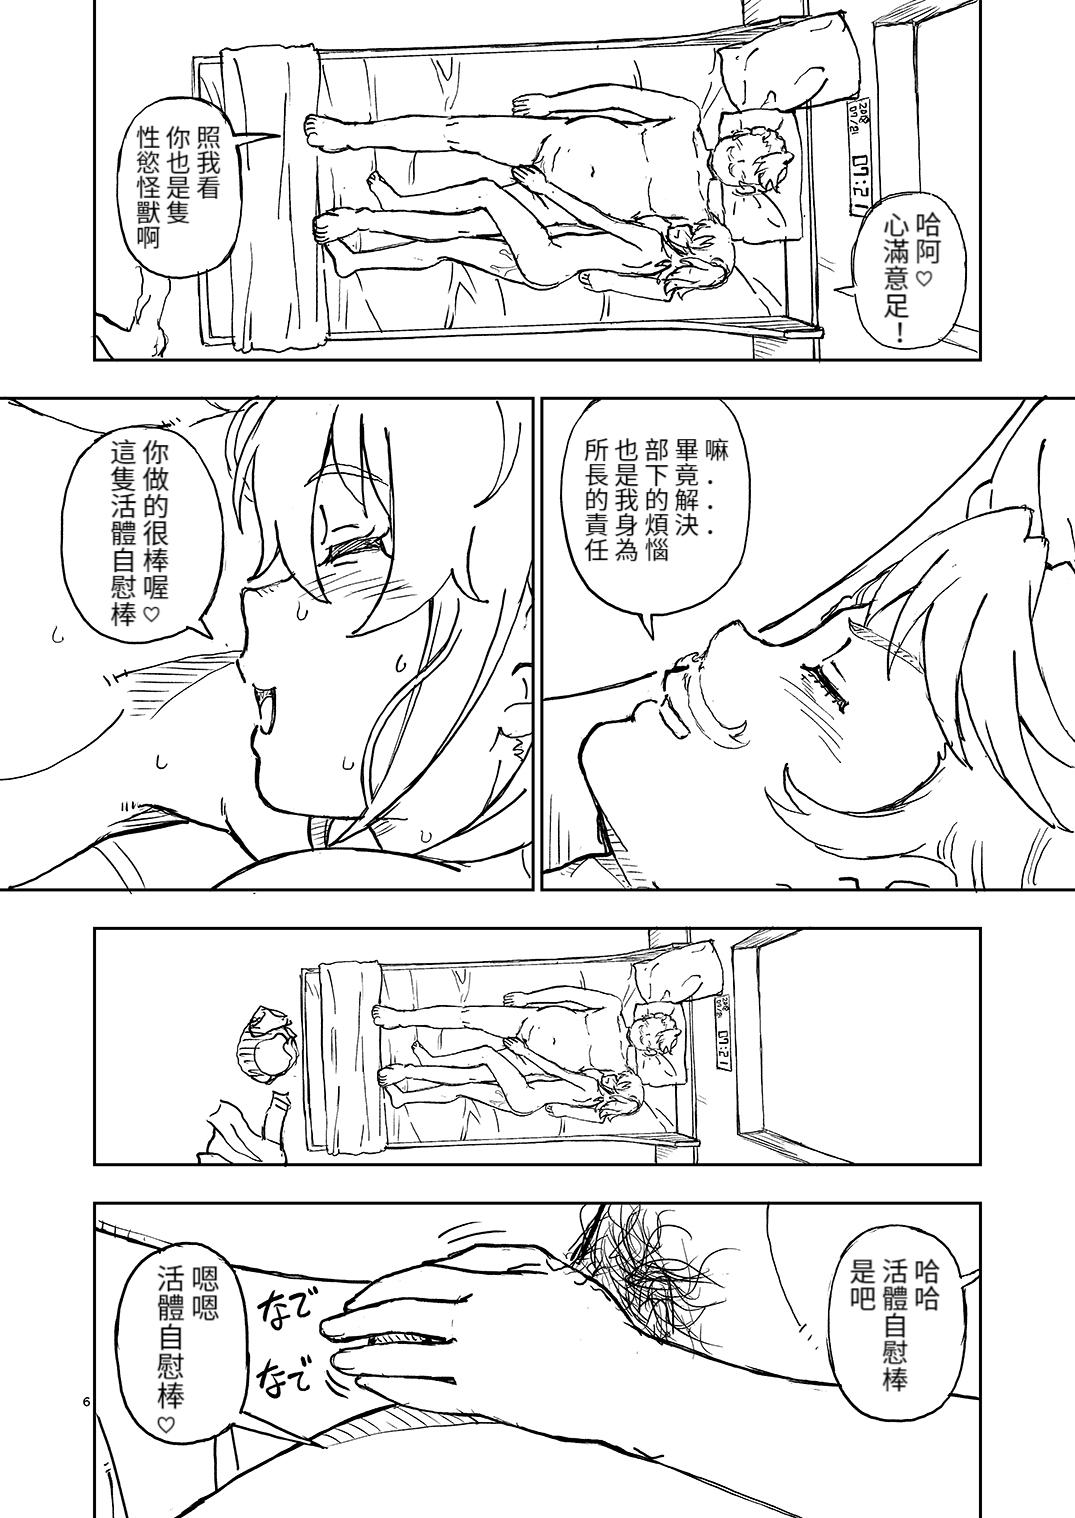 Oral Porn C96 no Omake - Fate grand order Whooty - Page 6